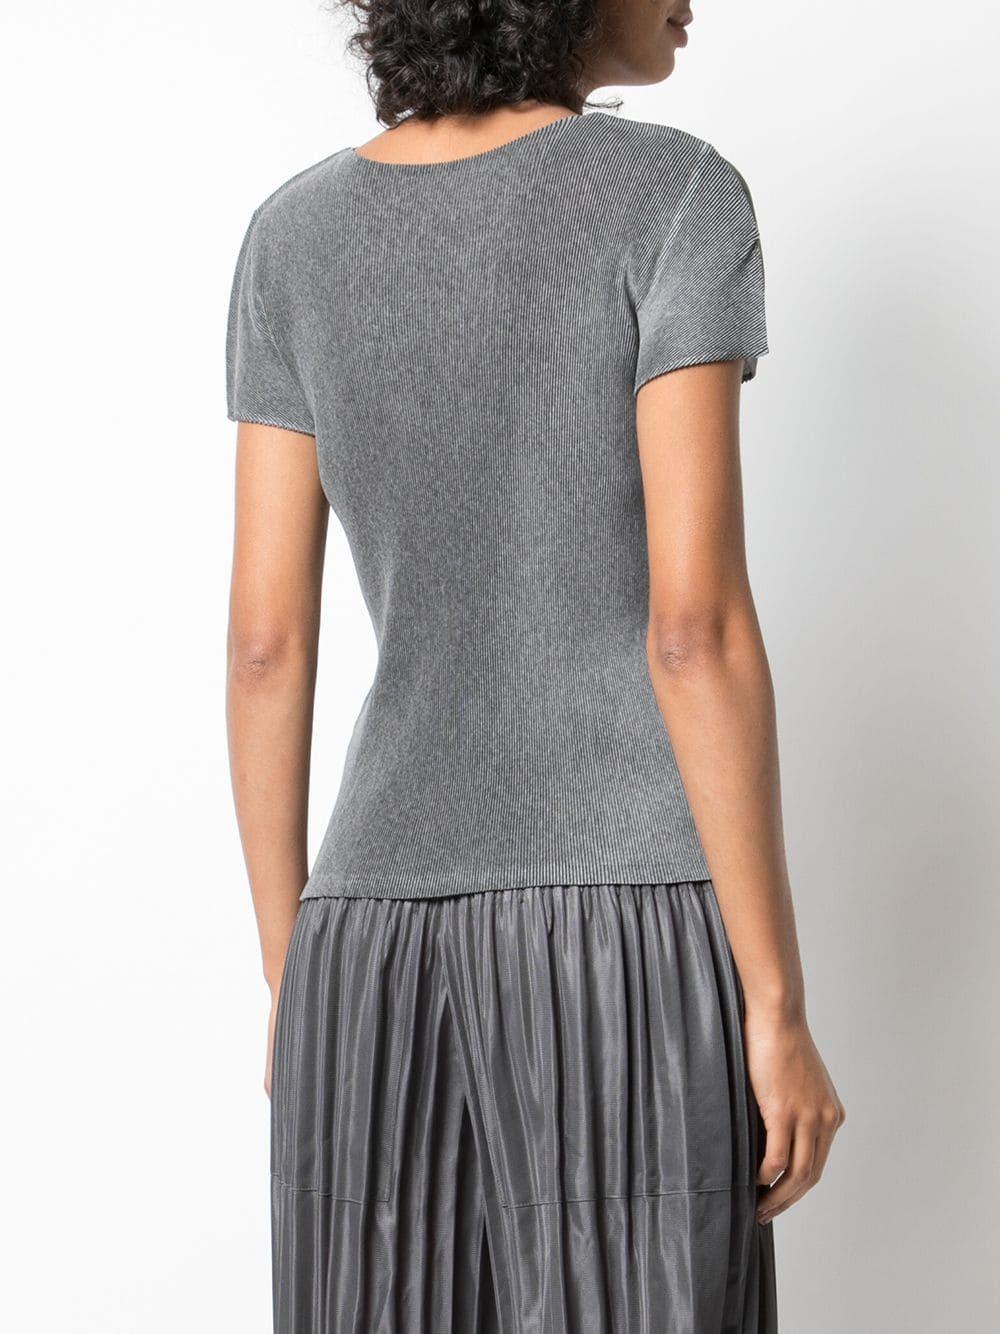 Issey Miyake Pleated T-shirt in Gray - Lyst